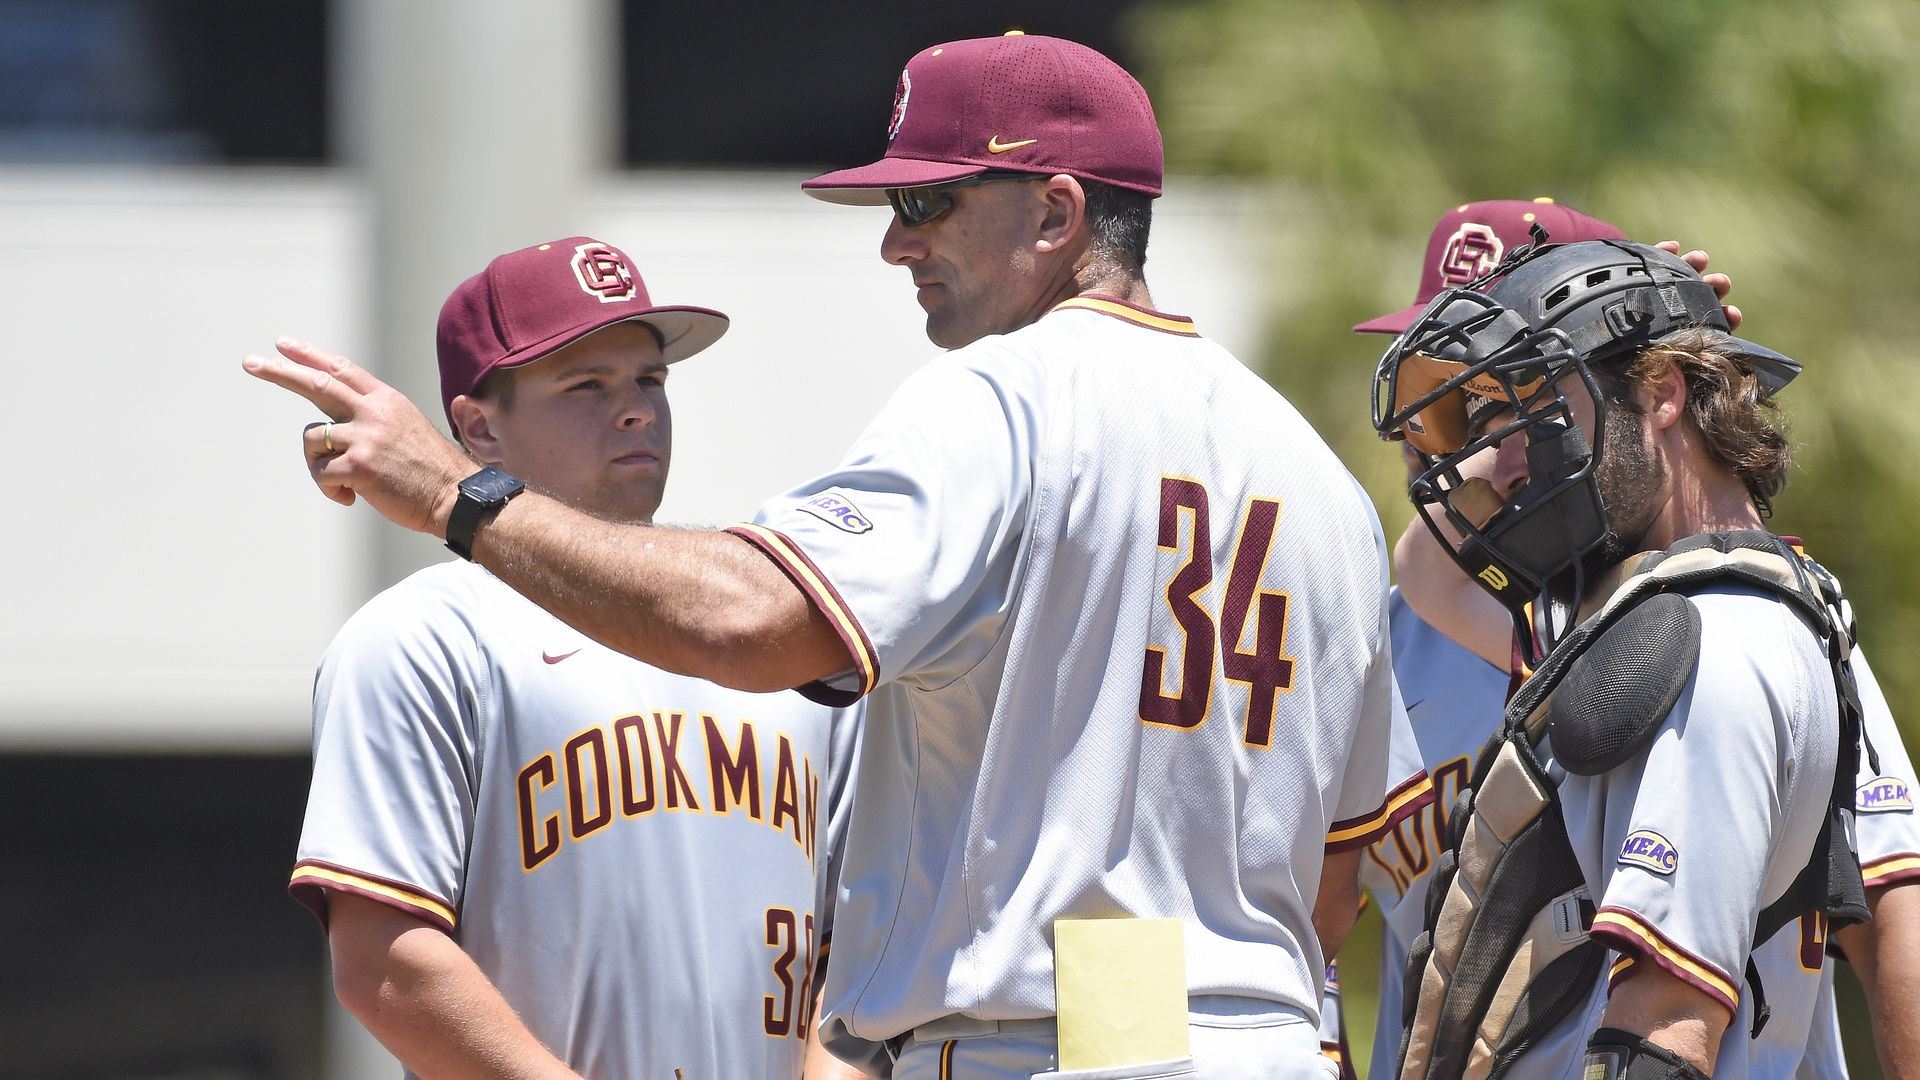 Bethune Cookman meeting at the mound